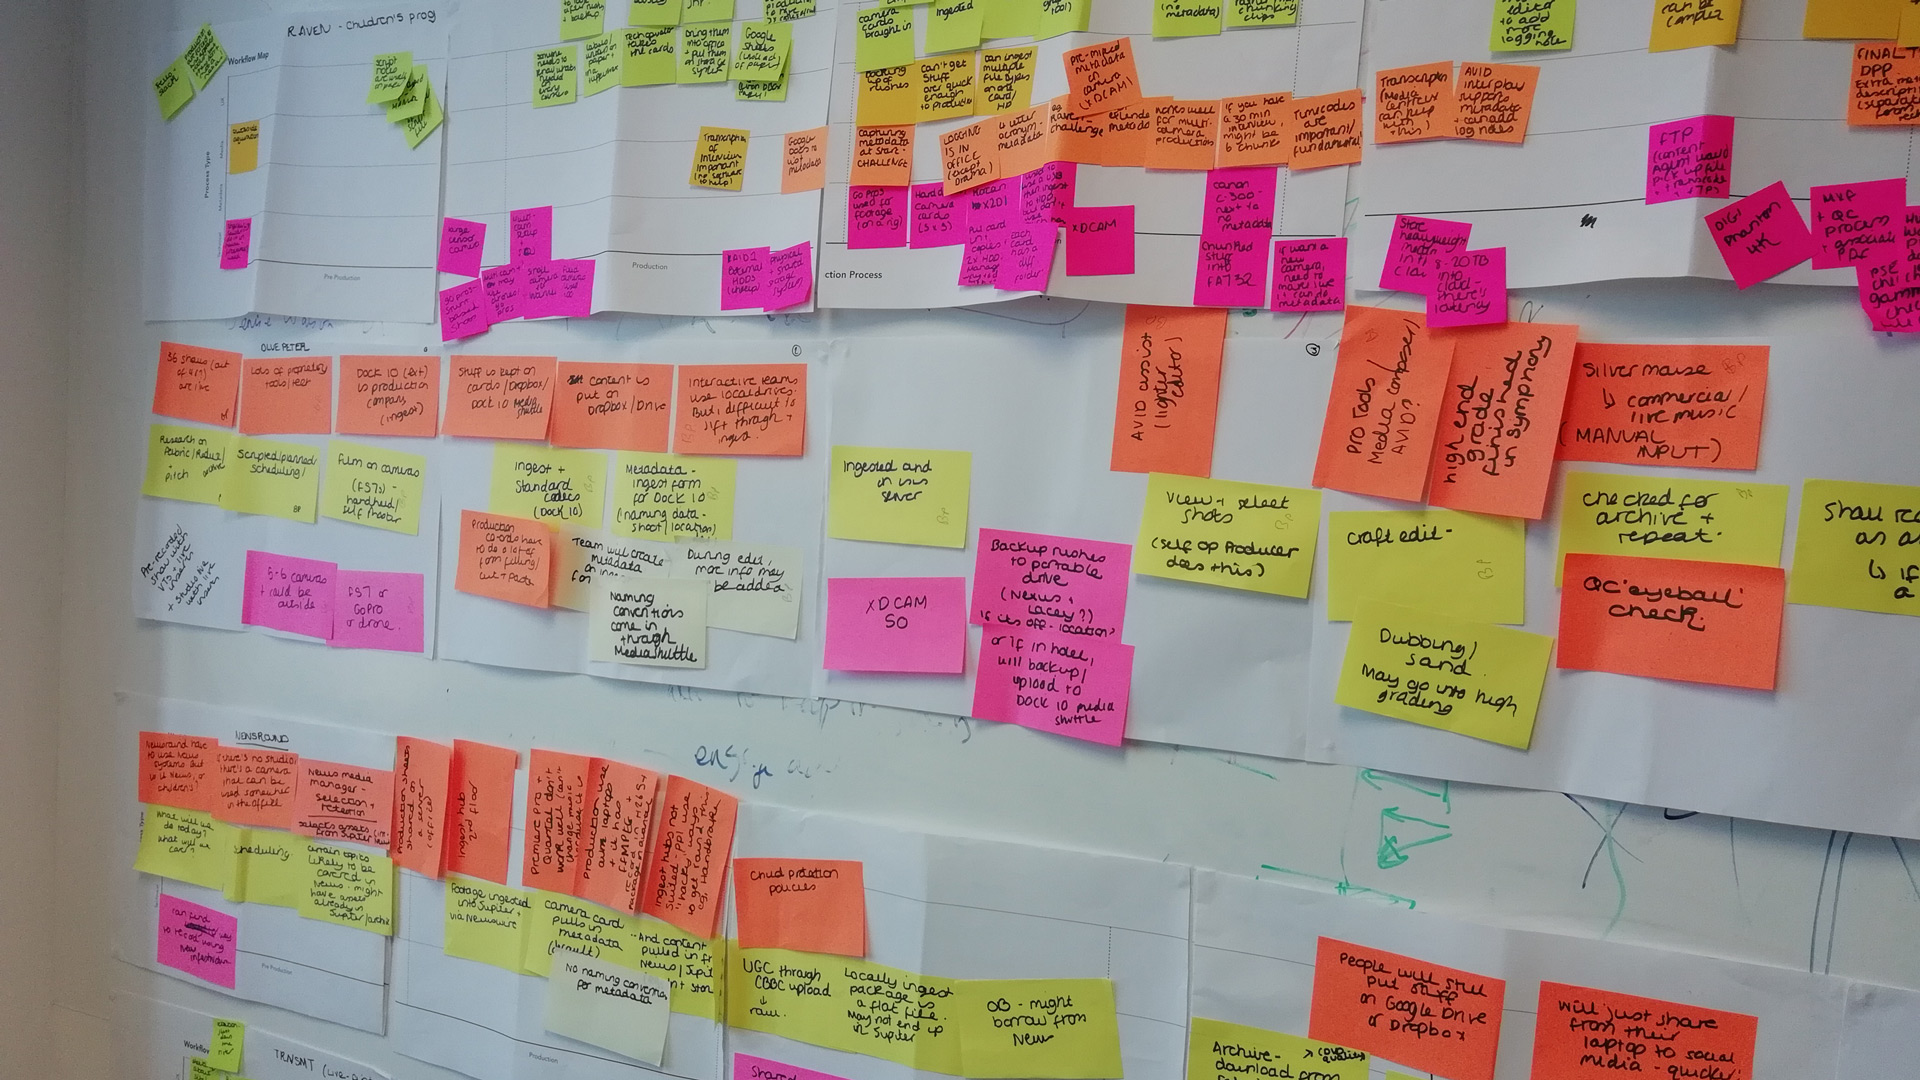 A zoomed-in photograph showing a wall with process maps and timelines created from coloured post-it notes. There are a number of maps, and they are stacked.